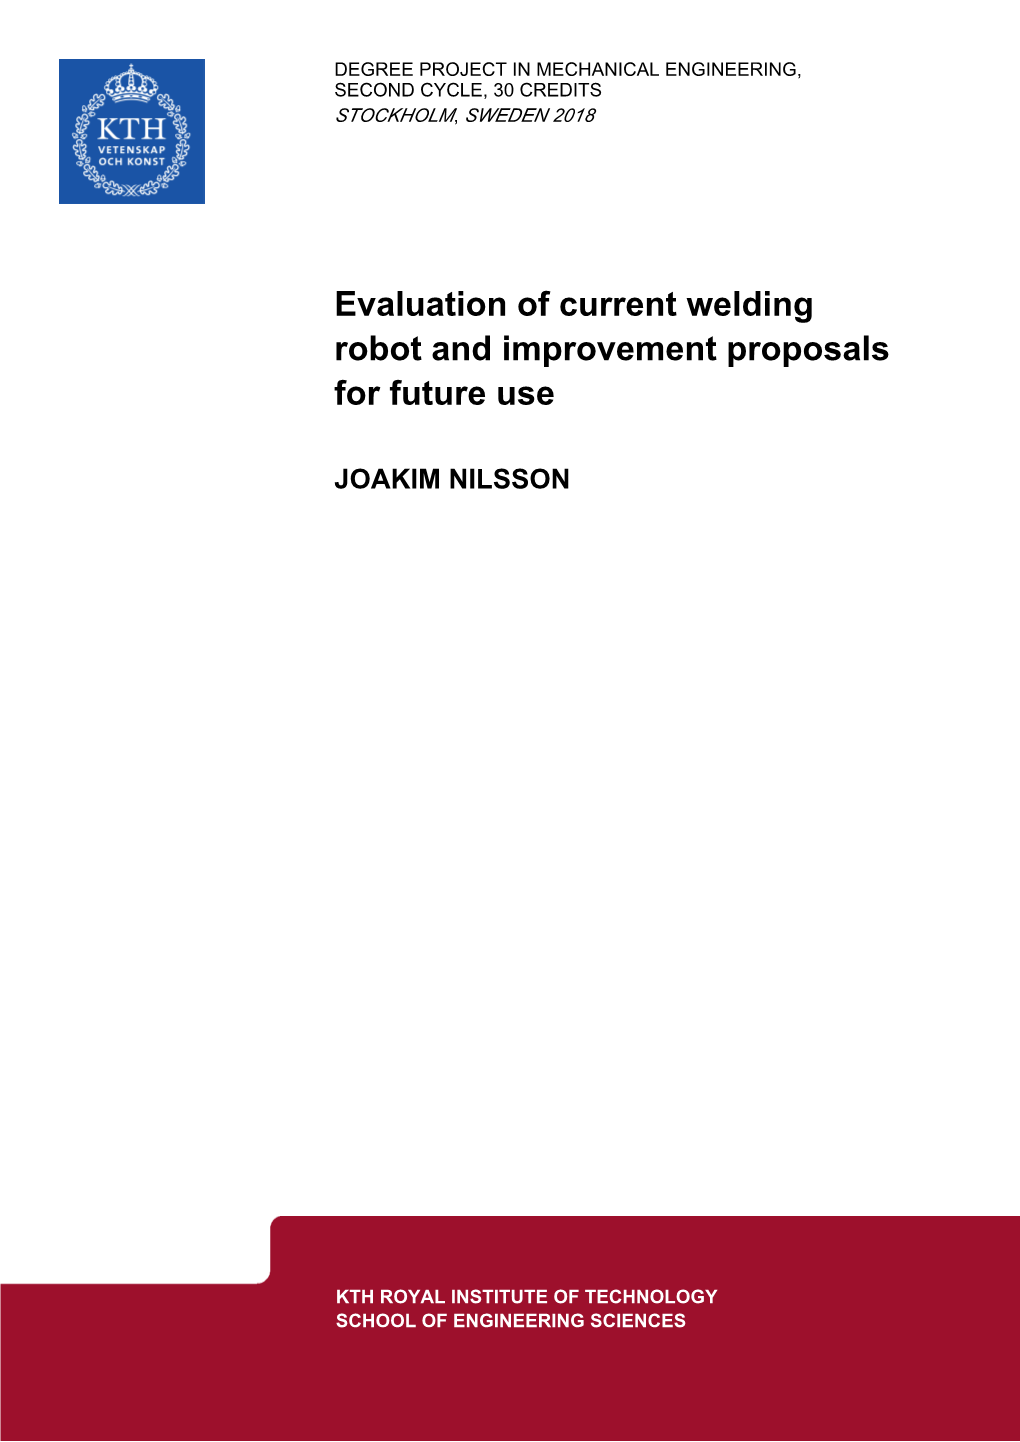 Evaluation of Current Welding Robot and Improvement Proposals for Future Use